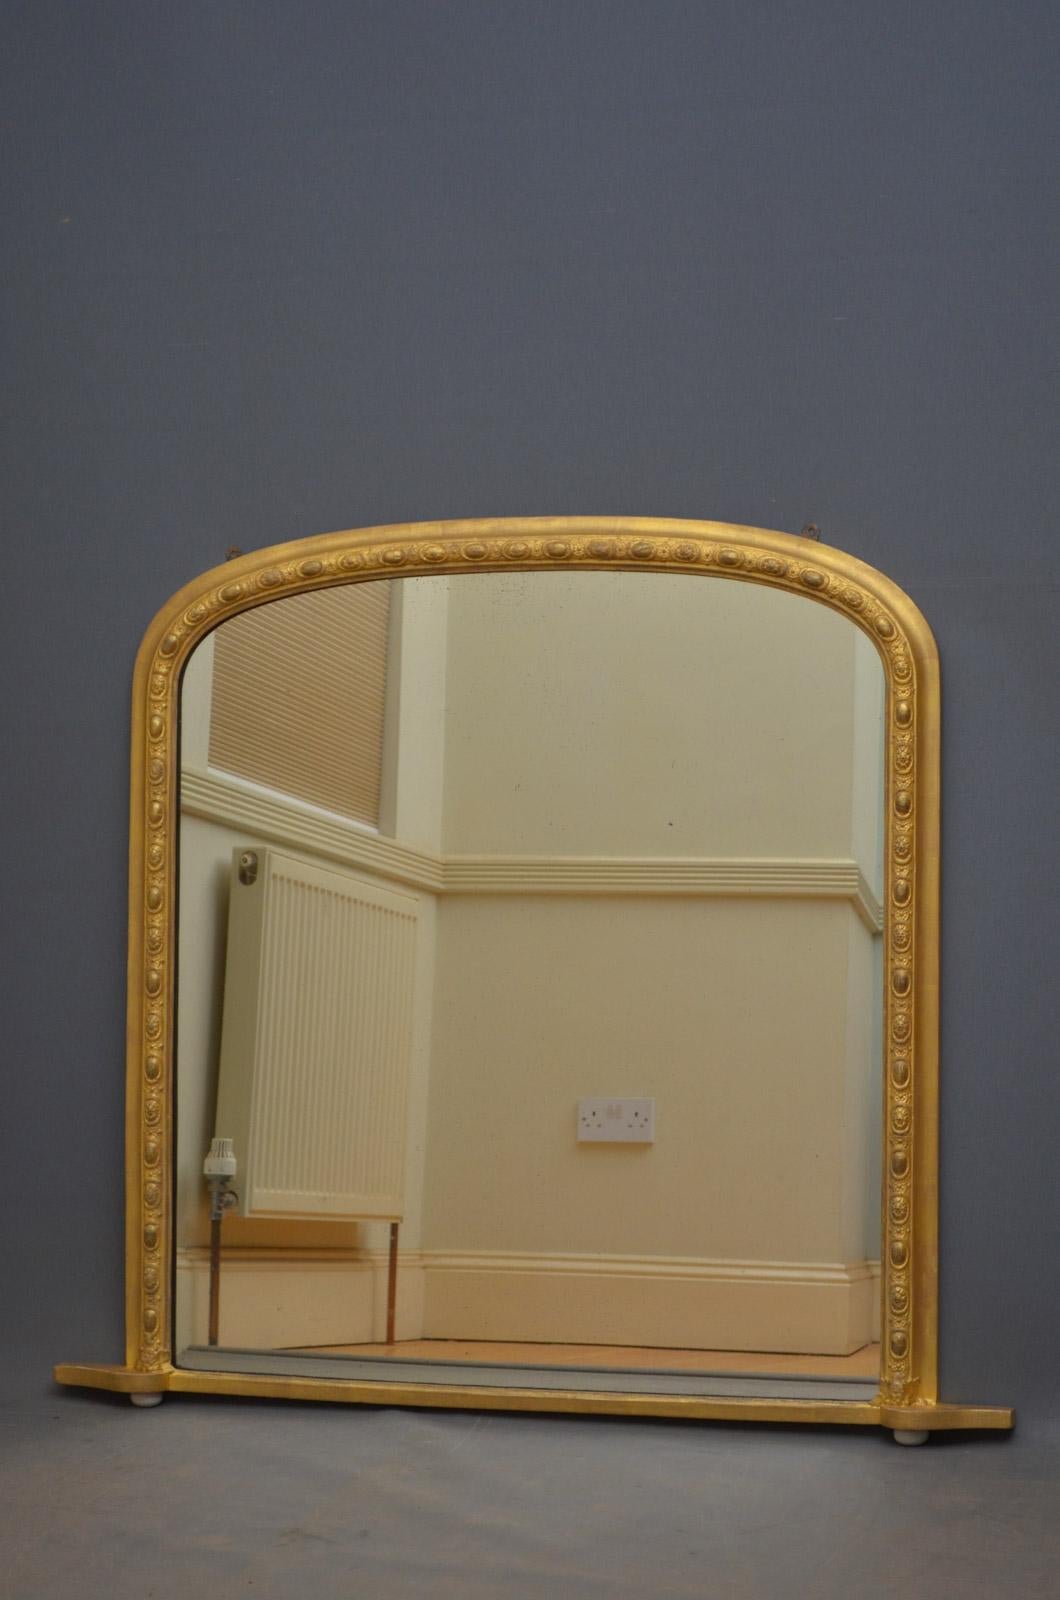 K0332 Victorian gilt overmantle mirror, having original mirror plate with some foxing in decorative frame. This antique mirror has been regilded in 23 carat gold leaf, ready to place at home, circa 1870.
H41